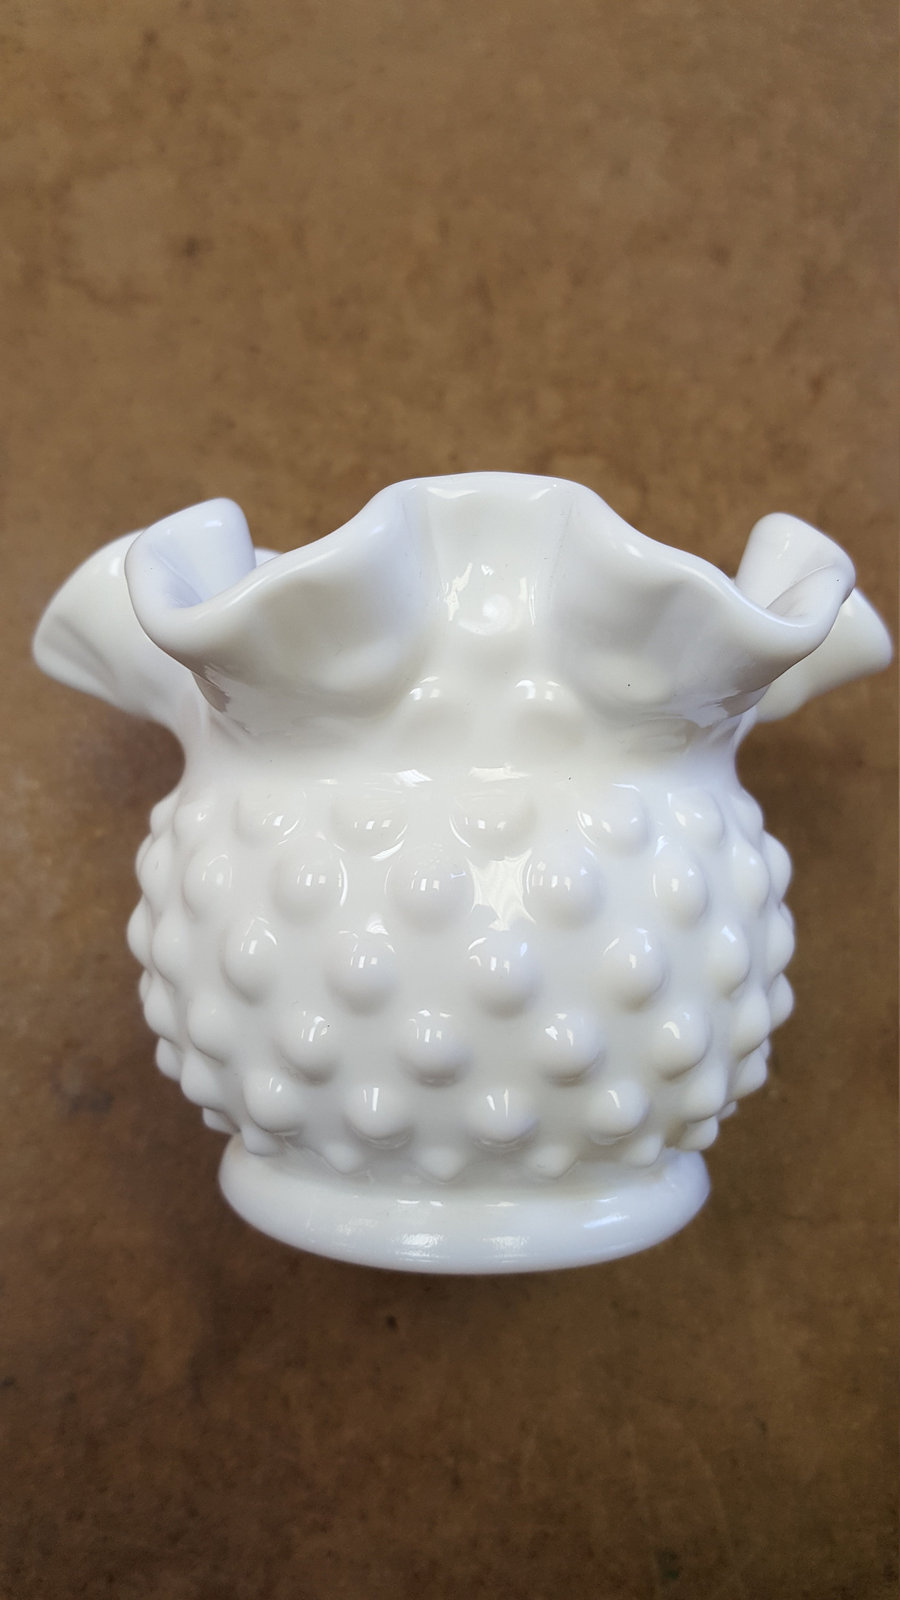 Primary image for Vintage, 1960's, Fenton Hobnail Small Milk Glass Rose Bowl Vase with ruffled rim